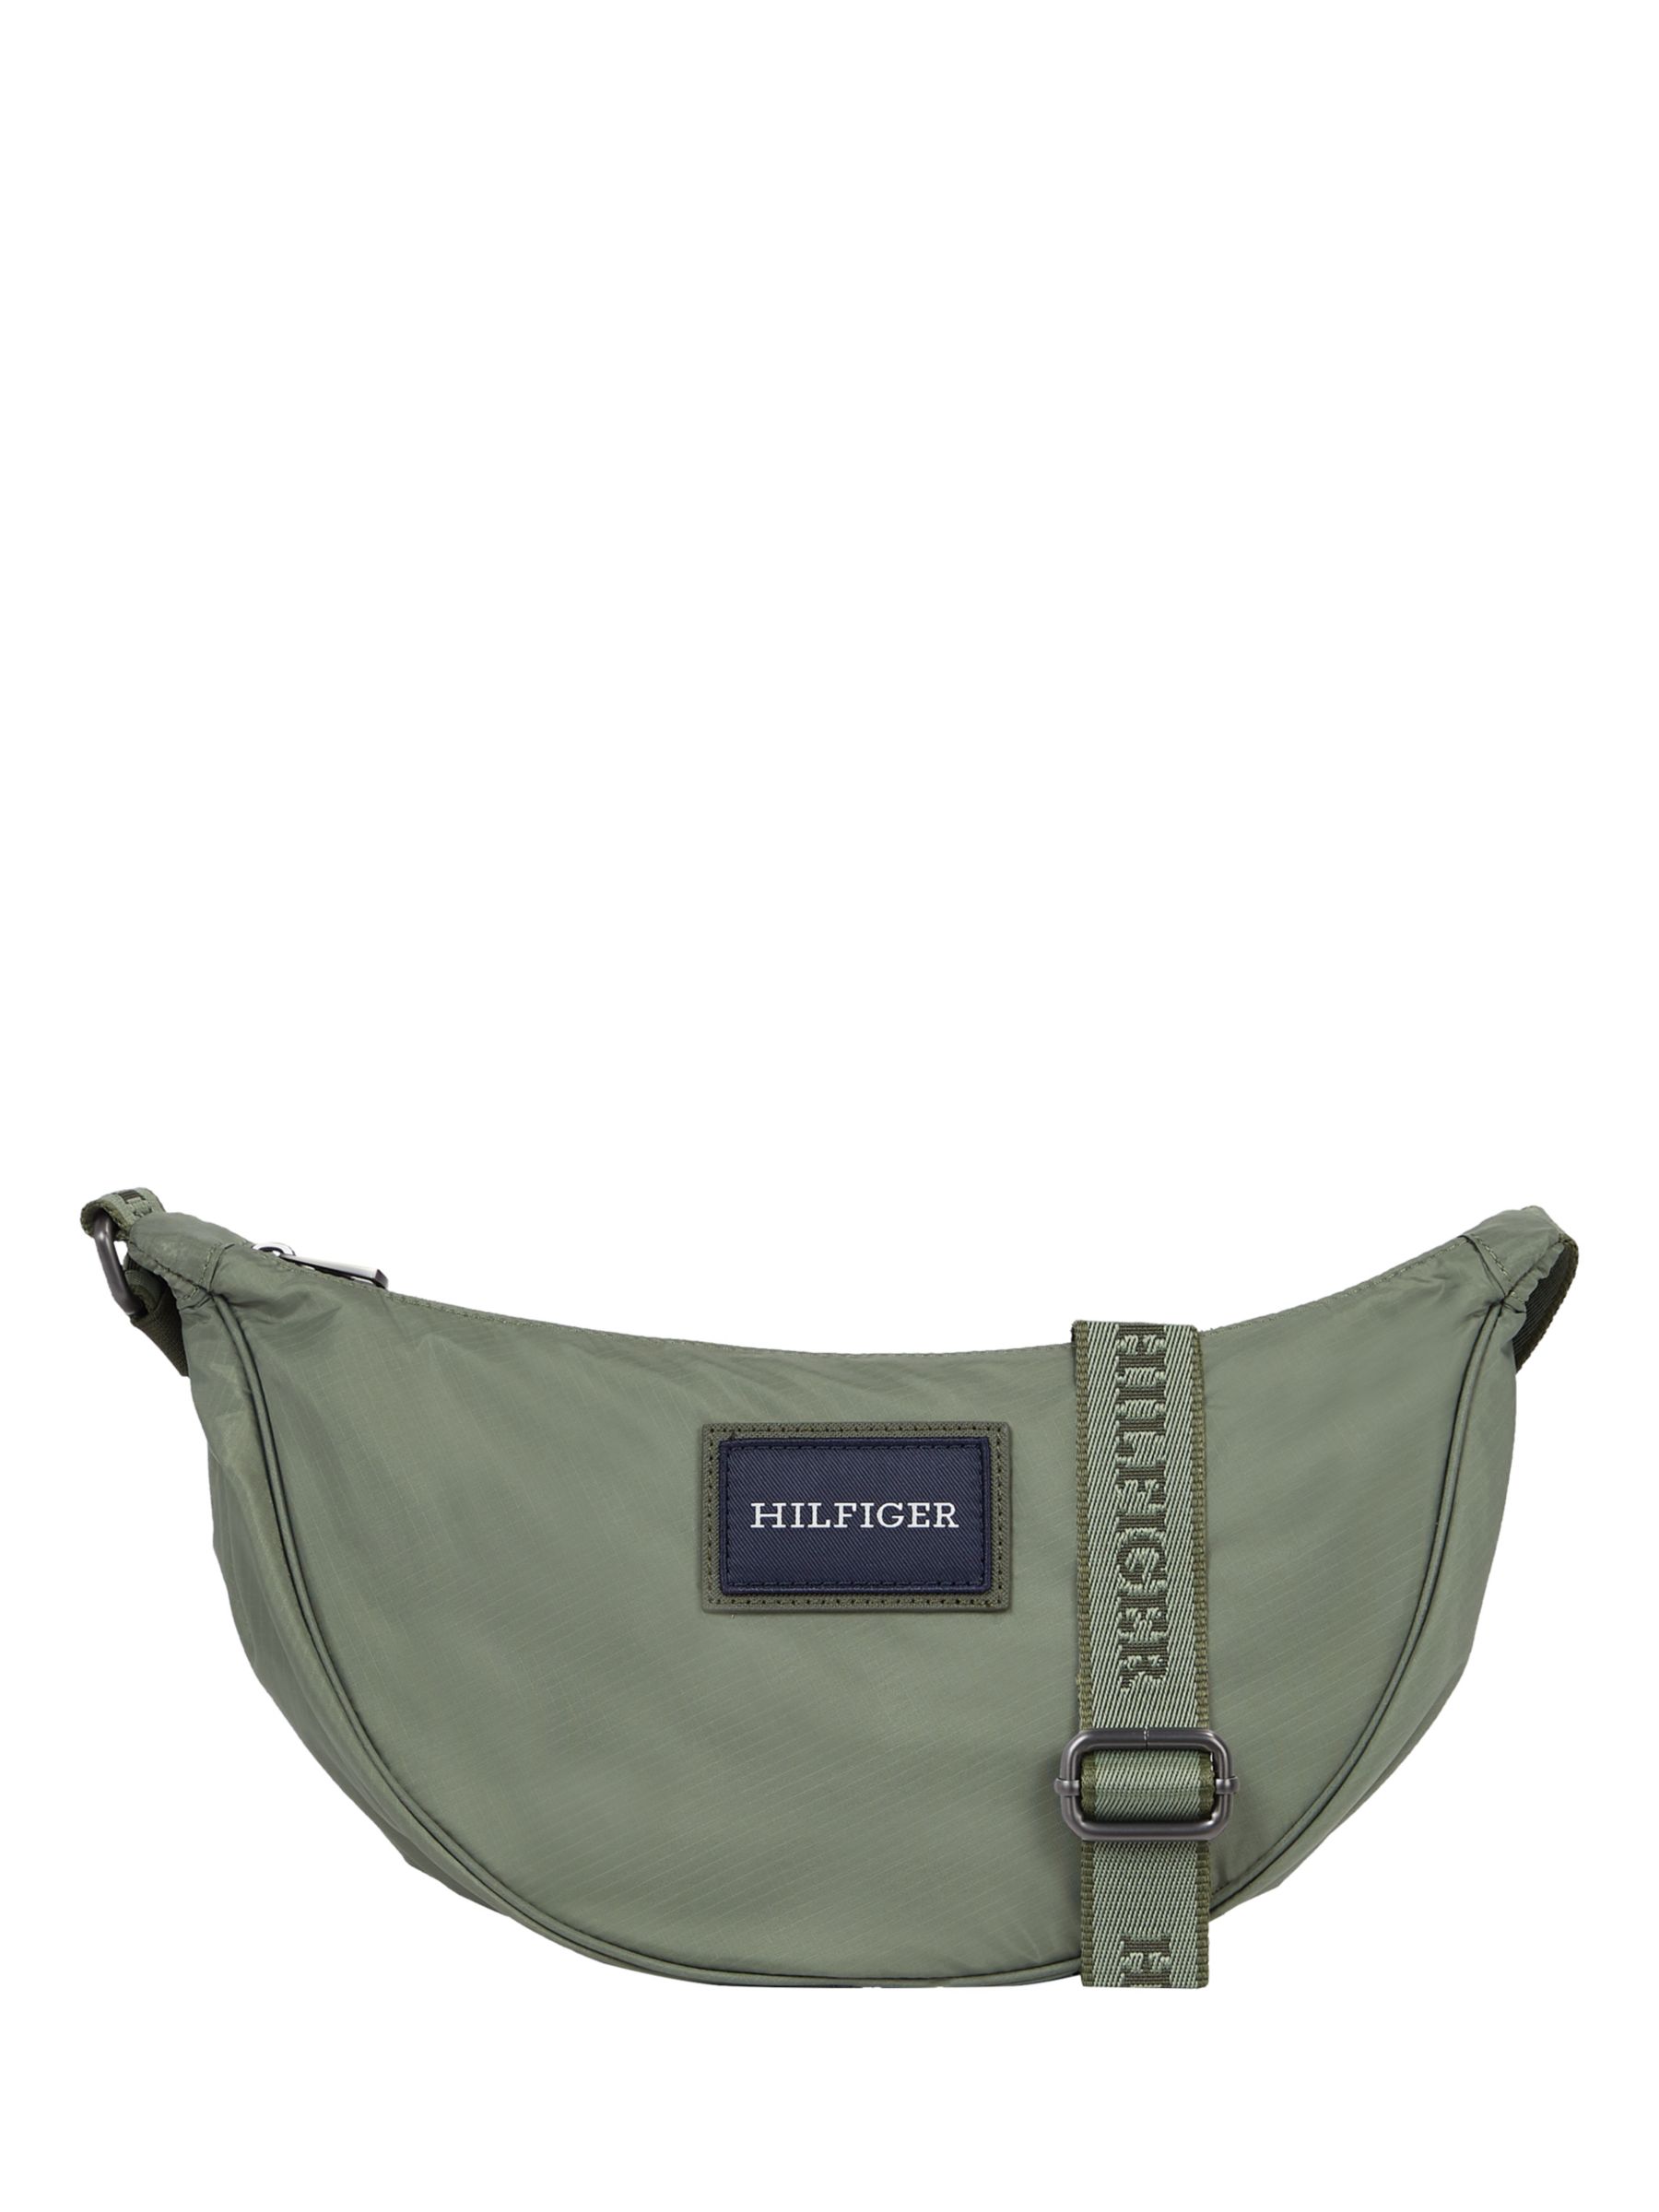 Tommy Hilfiger Crescent Crossover Bag, Green Acres, One Size